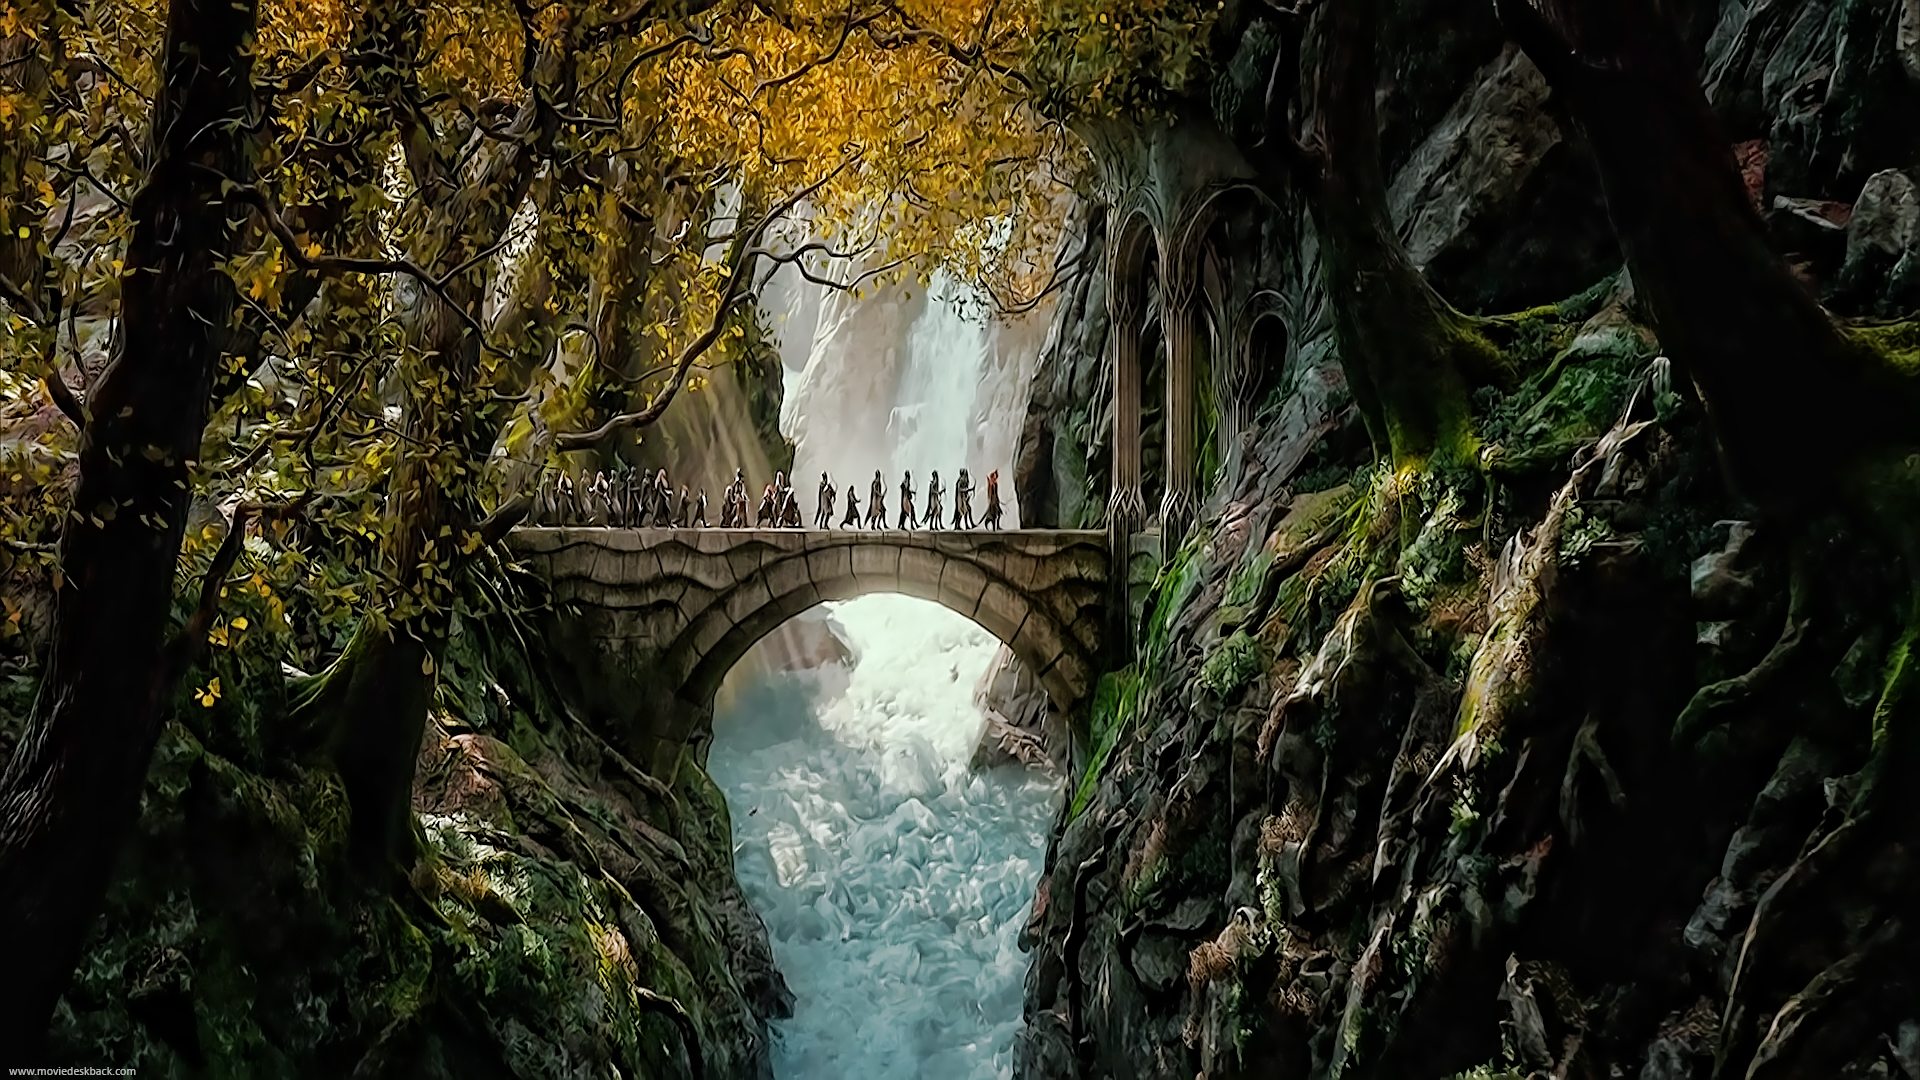  Desolation of Smaug fantastic landscape wallpapers Movie Wallpapers 1920x1080